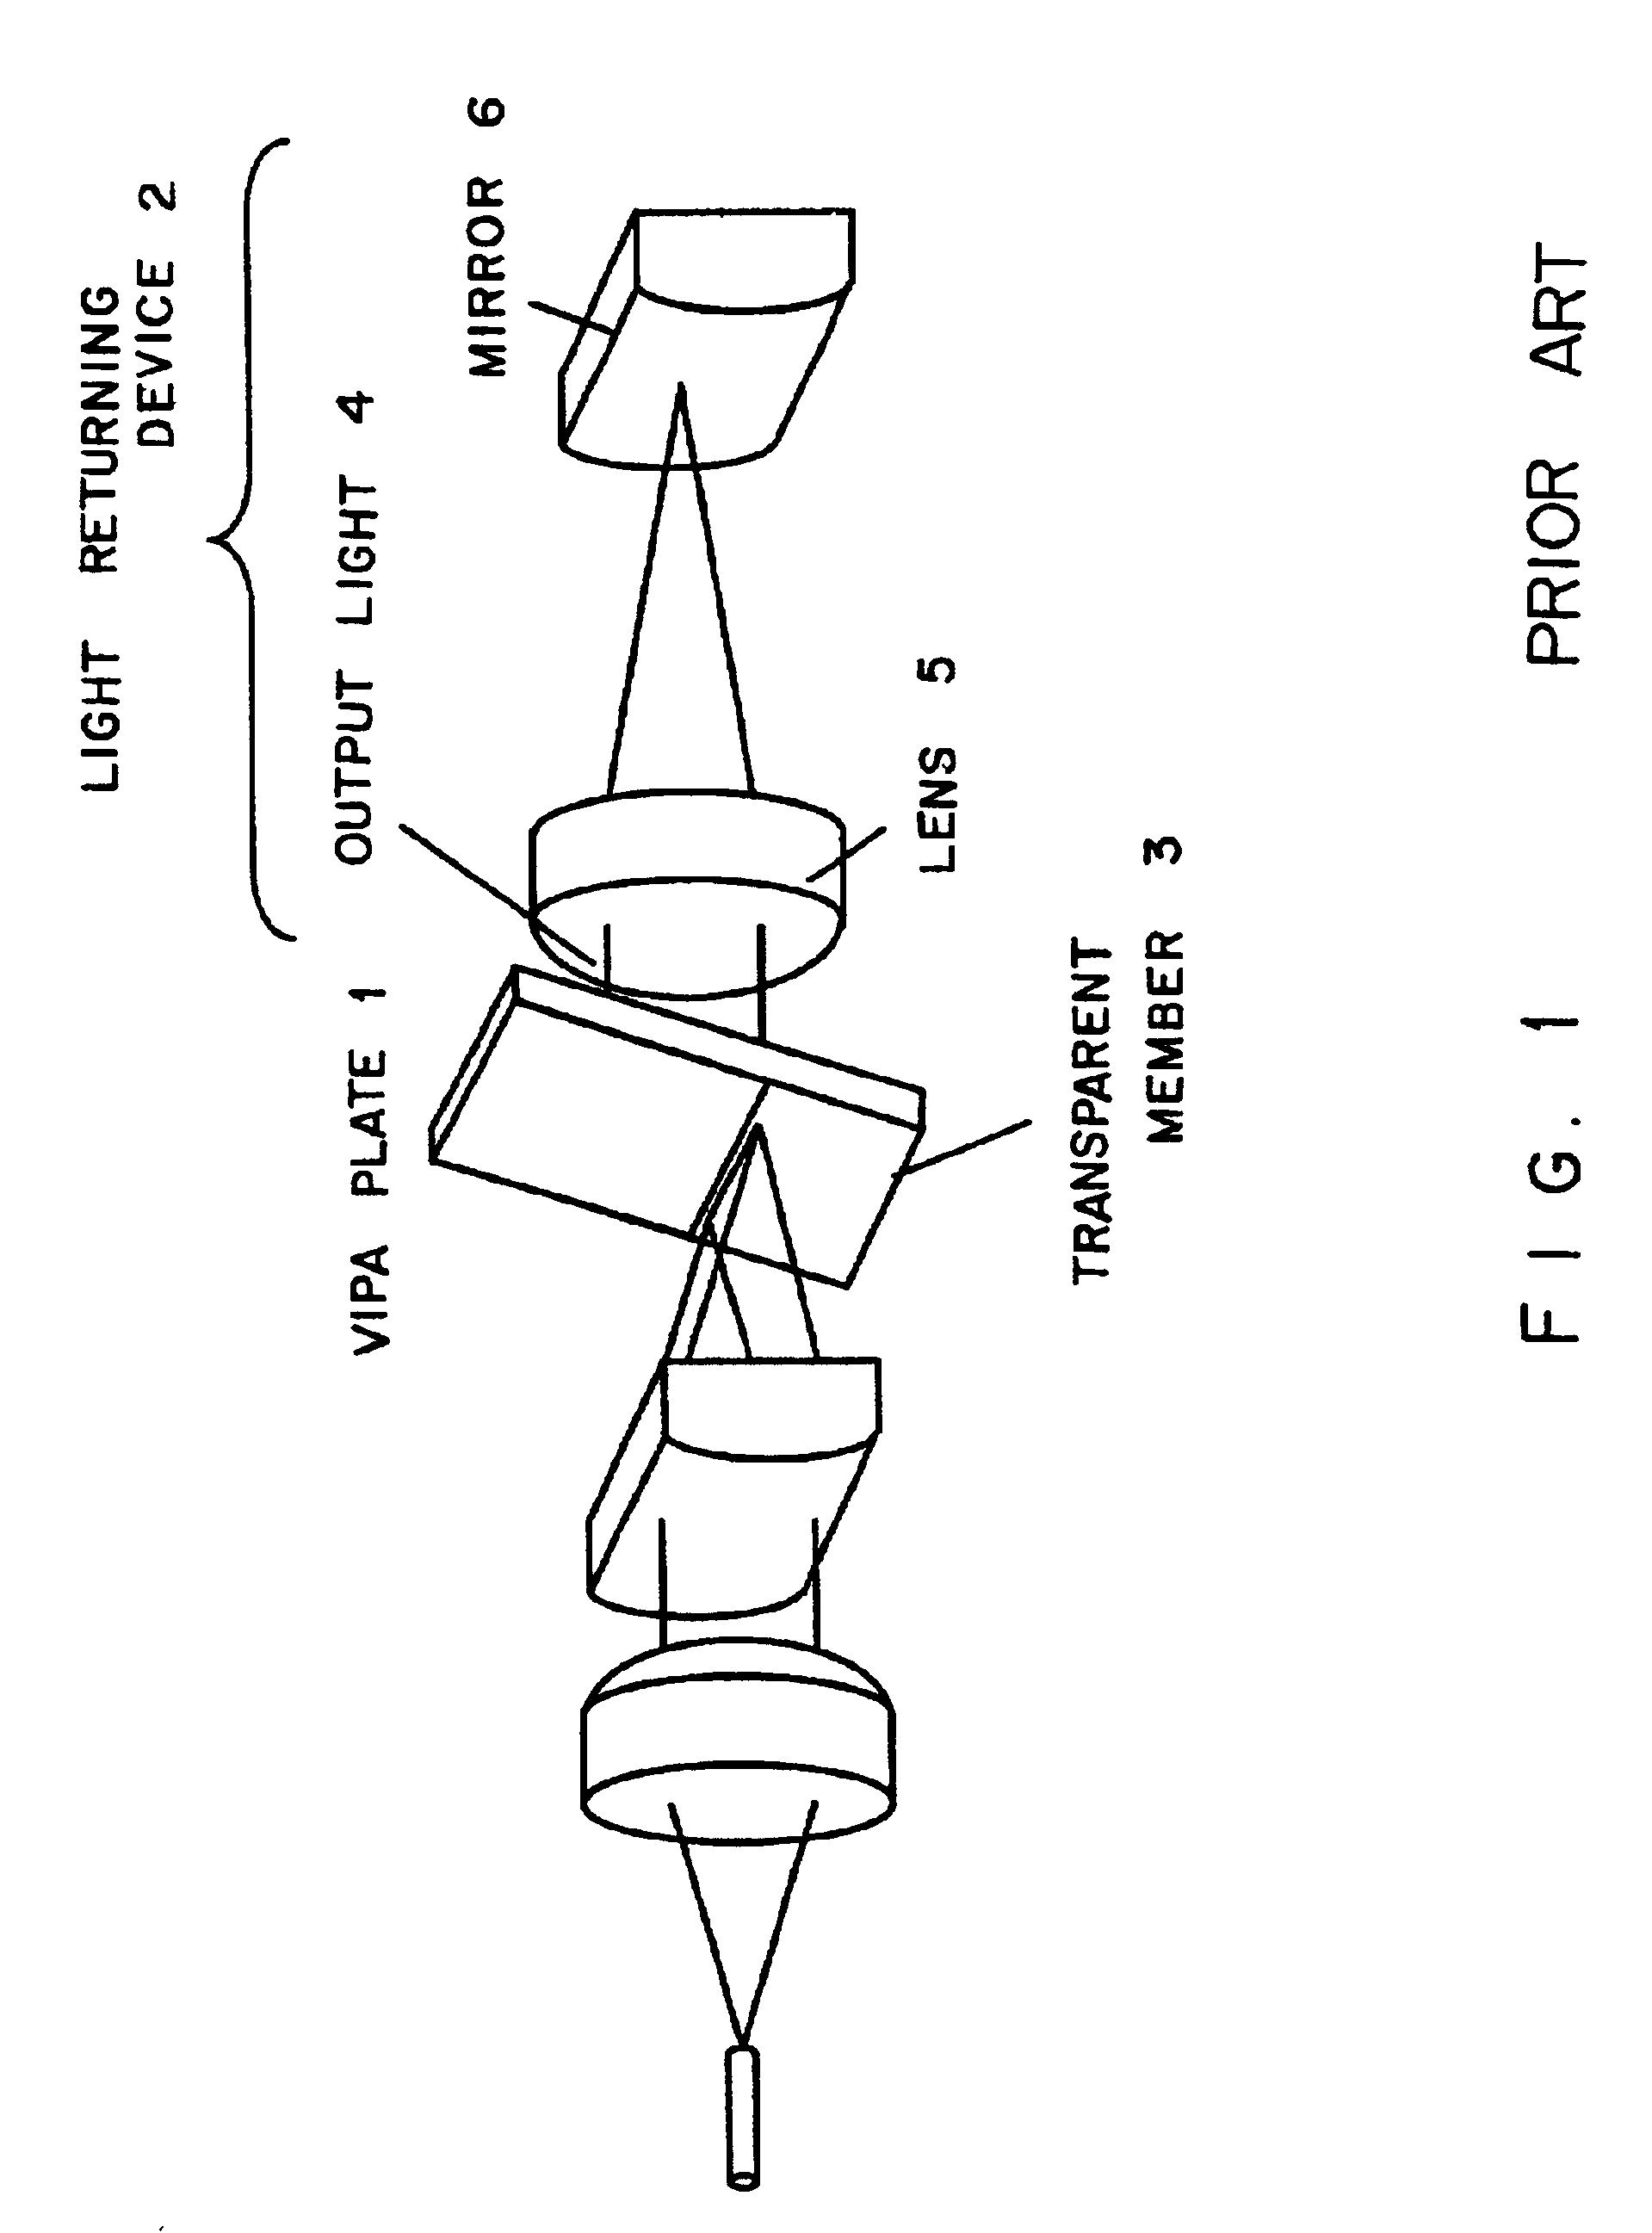 Optical apparatus and device